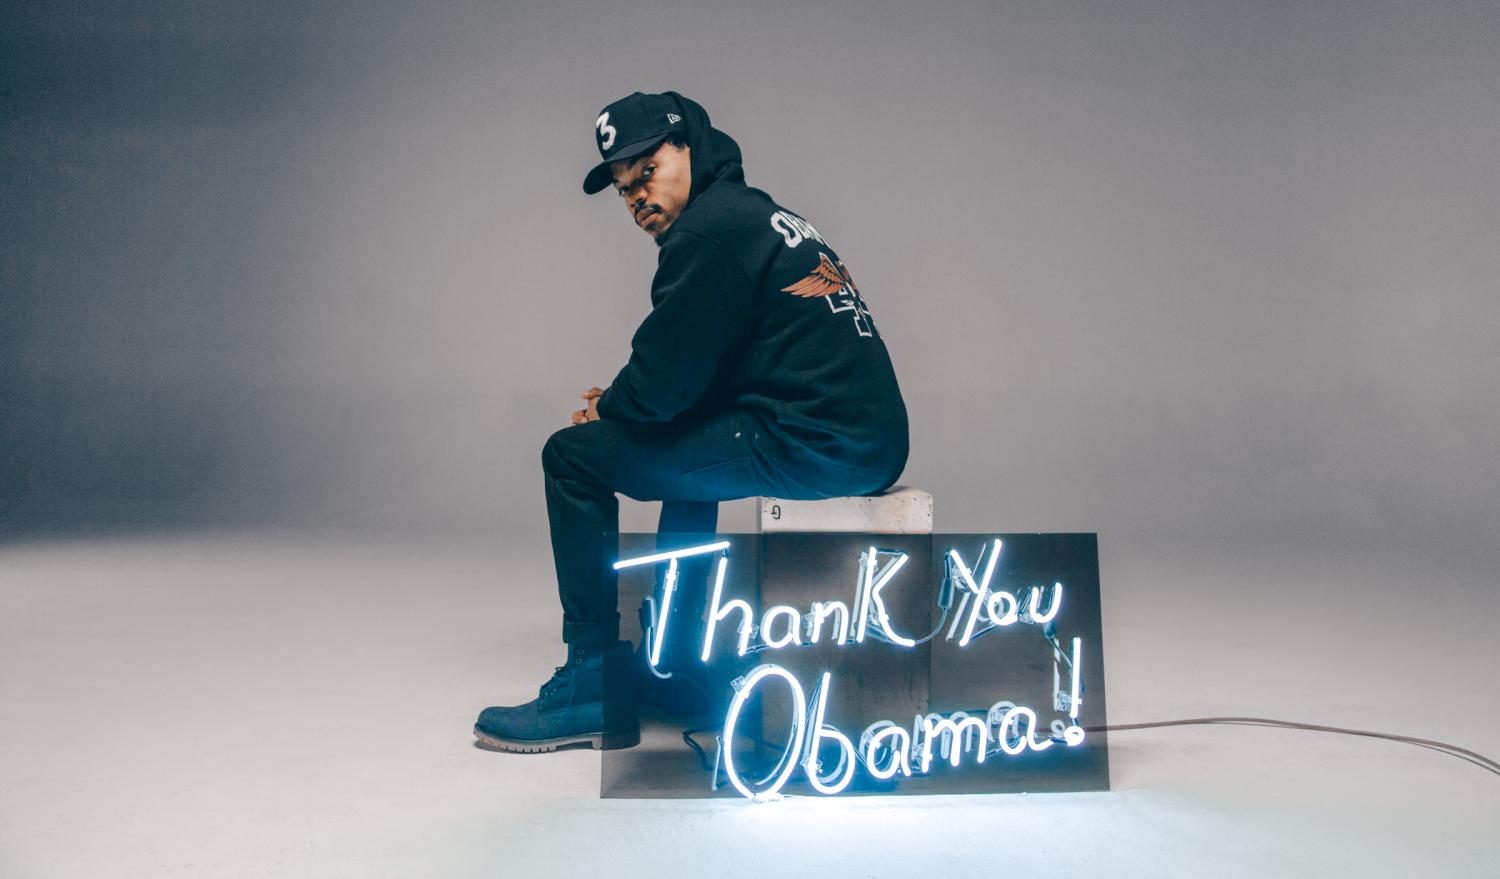 Chance+The+Rapper+models+the+Thank+You+Obama+line%E2%80%99s+%E2%80%9CThank+You+Hoodie%E2%80%9D.+%28Photo+courtesy+of+Nolis+Anderson%29